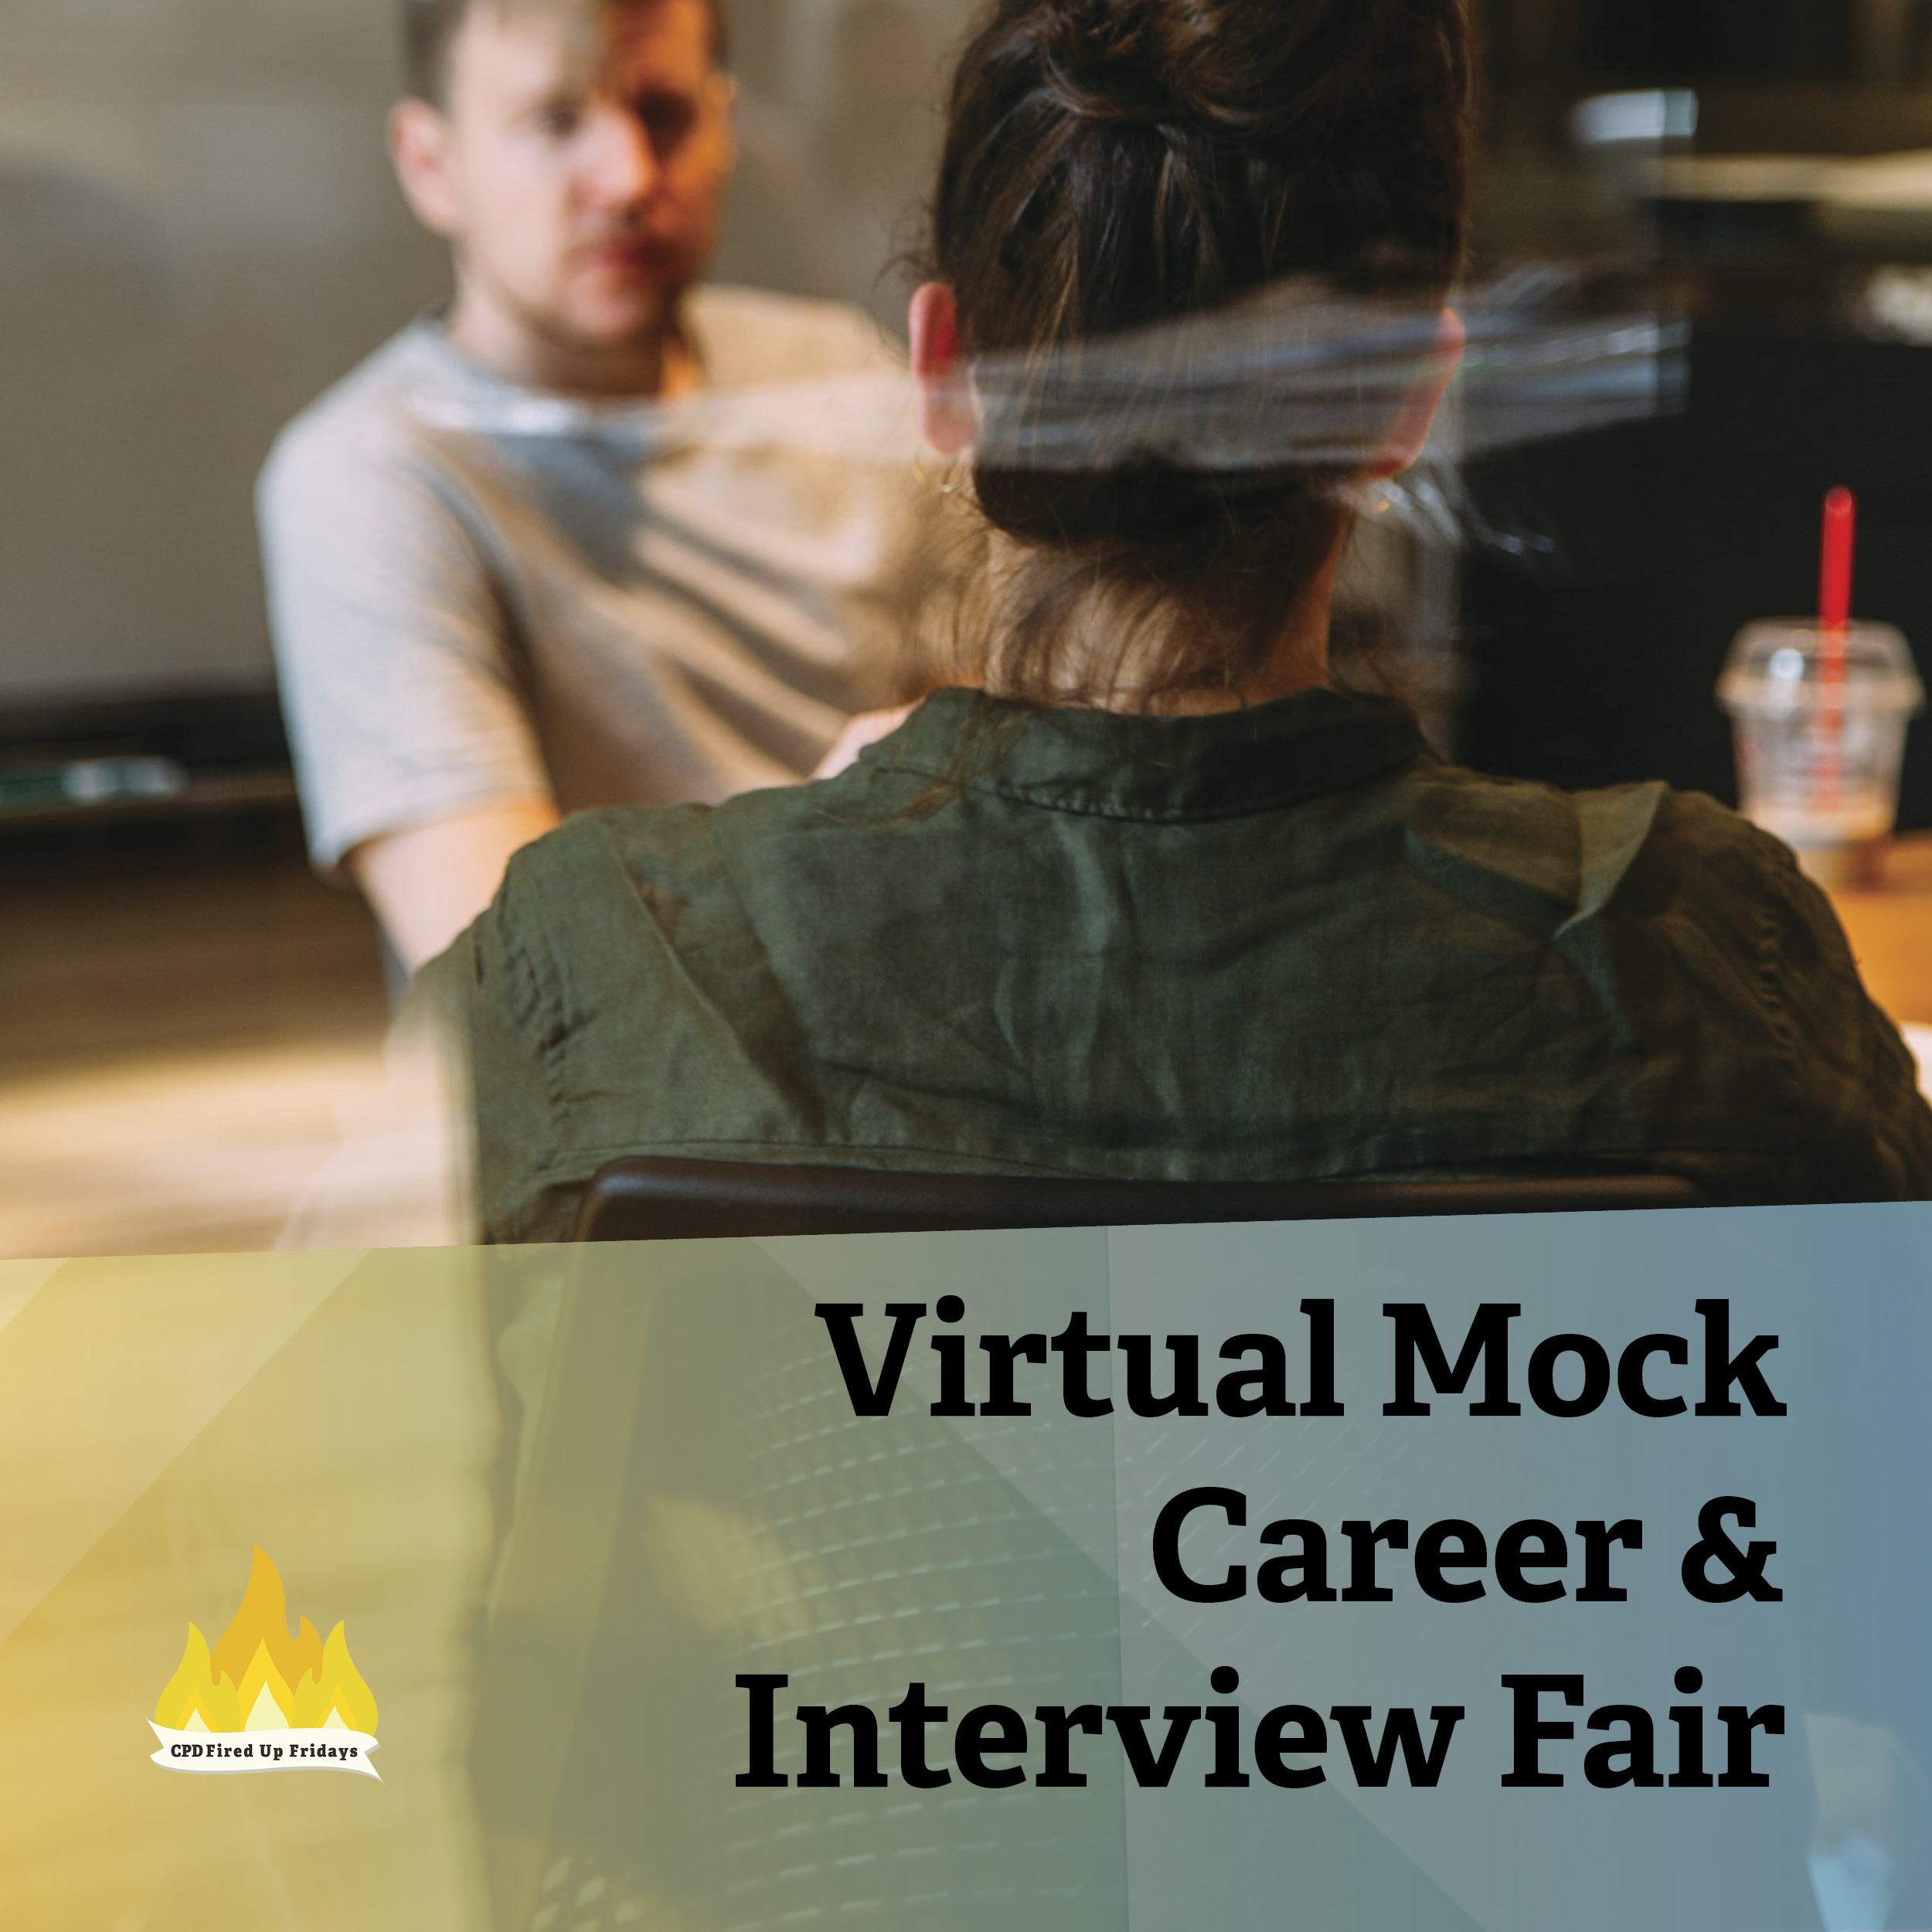 A woman with her hair up in a bun sits with her back to the camera. Across the table in front of her, a man leans back seeming to be listening to her. Underneath, the text reads: 'Virtual Mock Career & Interview Fair'